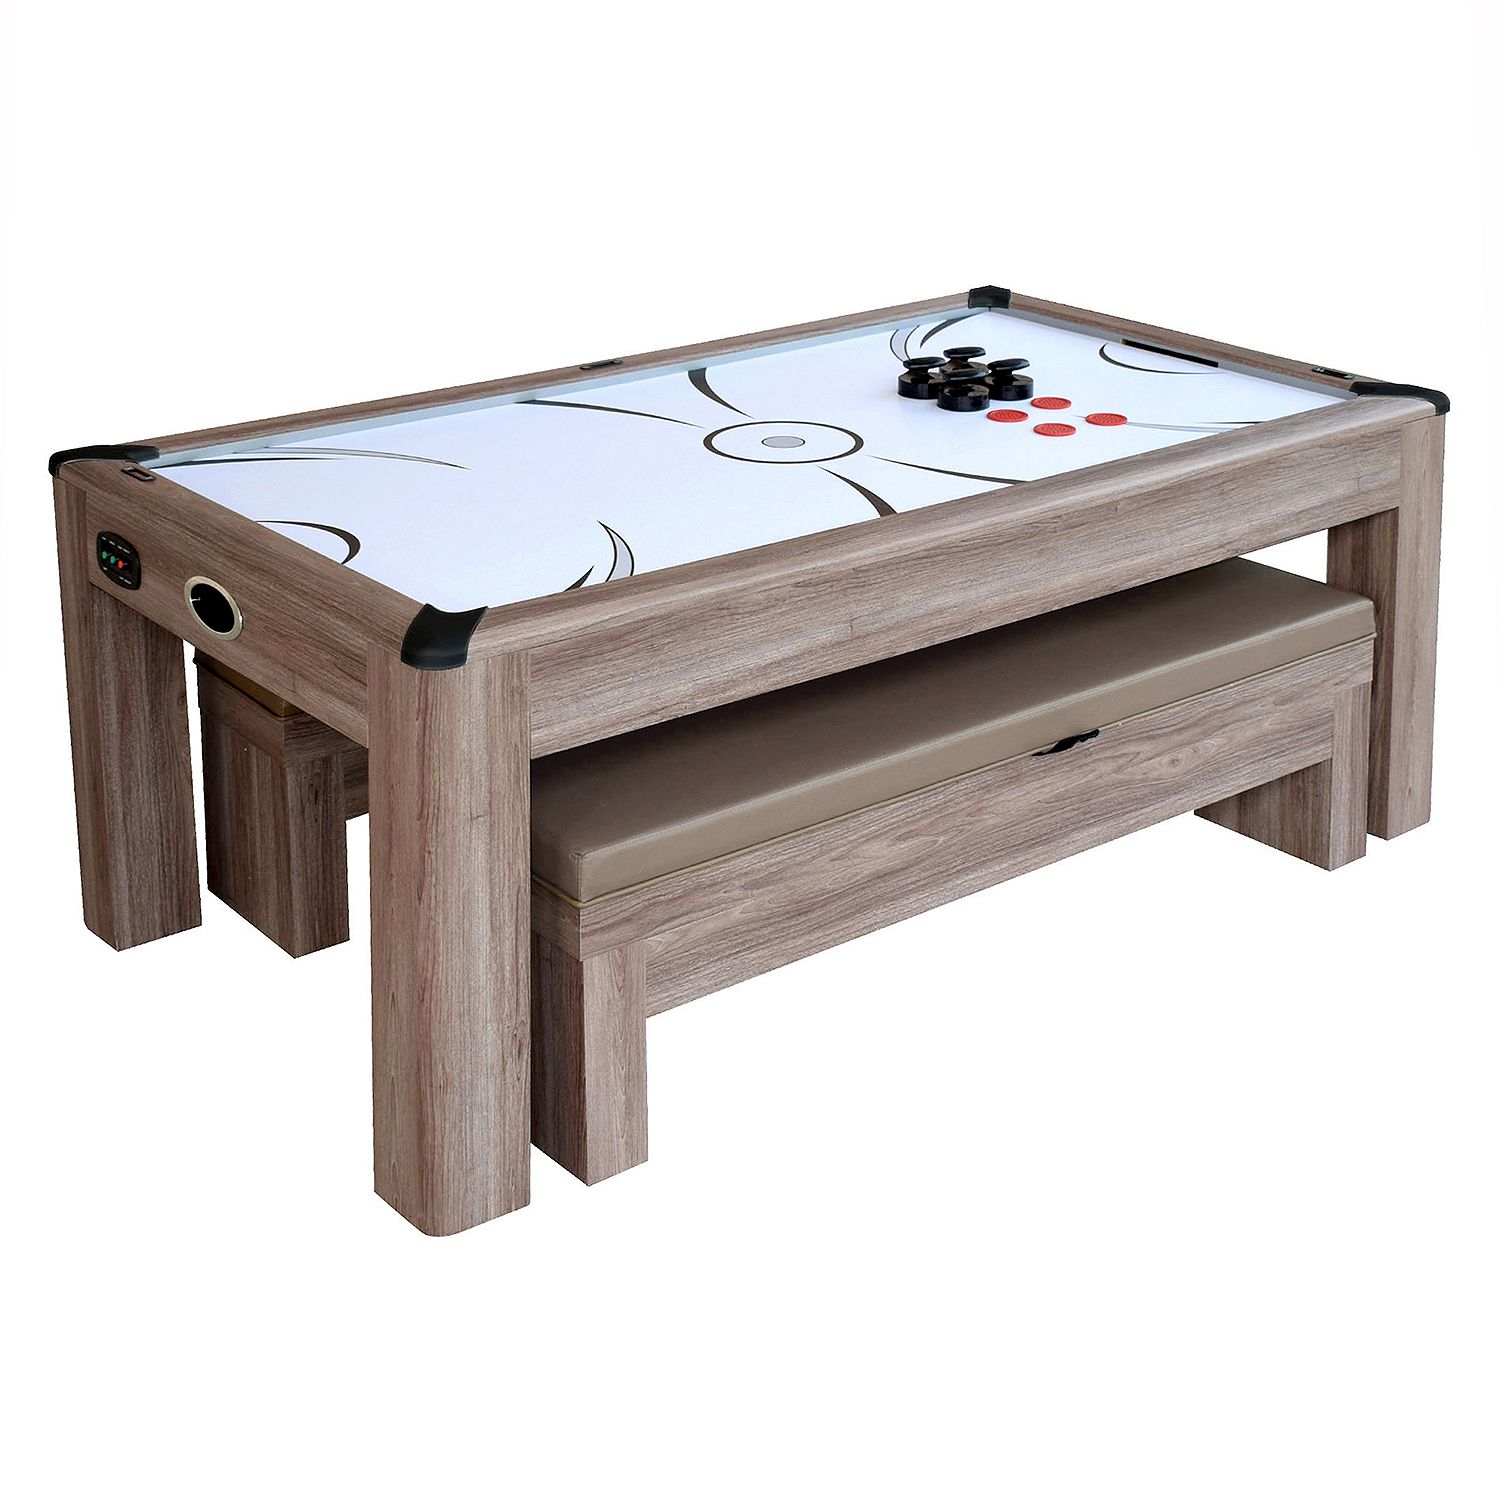 Driftwood 7 Ft Air Hockey Table Combo Set With Benches Pool